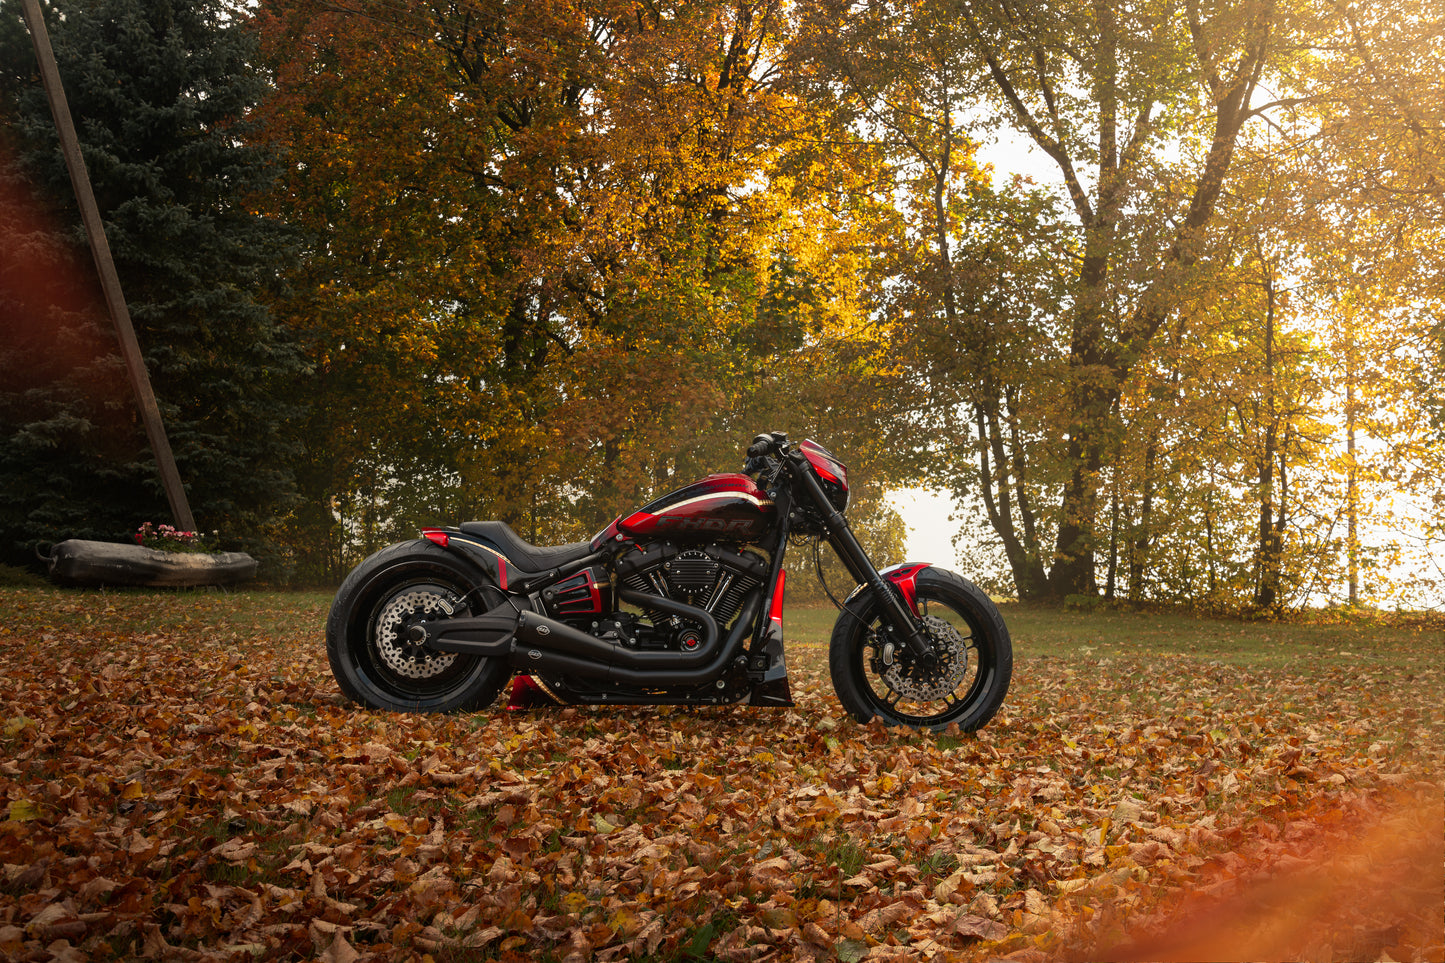 Harley Davidson motorcycle with Killer Custom "Avenger" front fender from the side outside with some trees and fallen leaves in the background